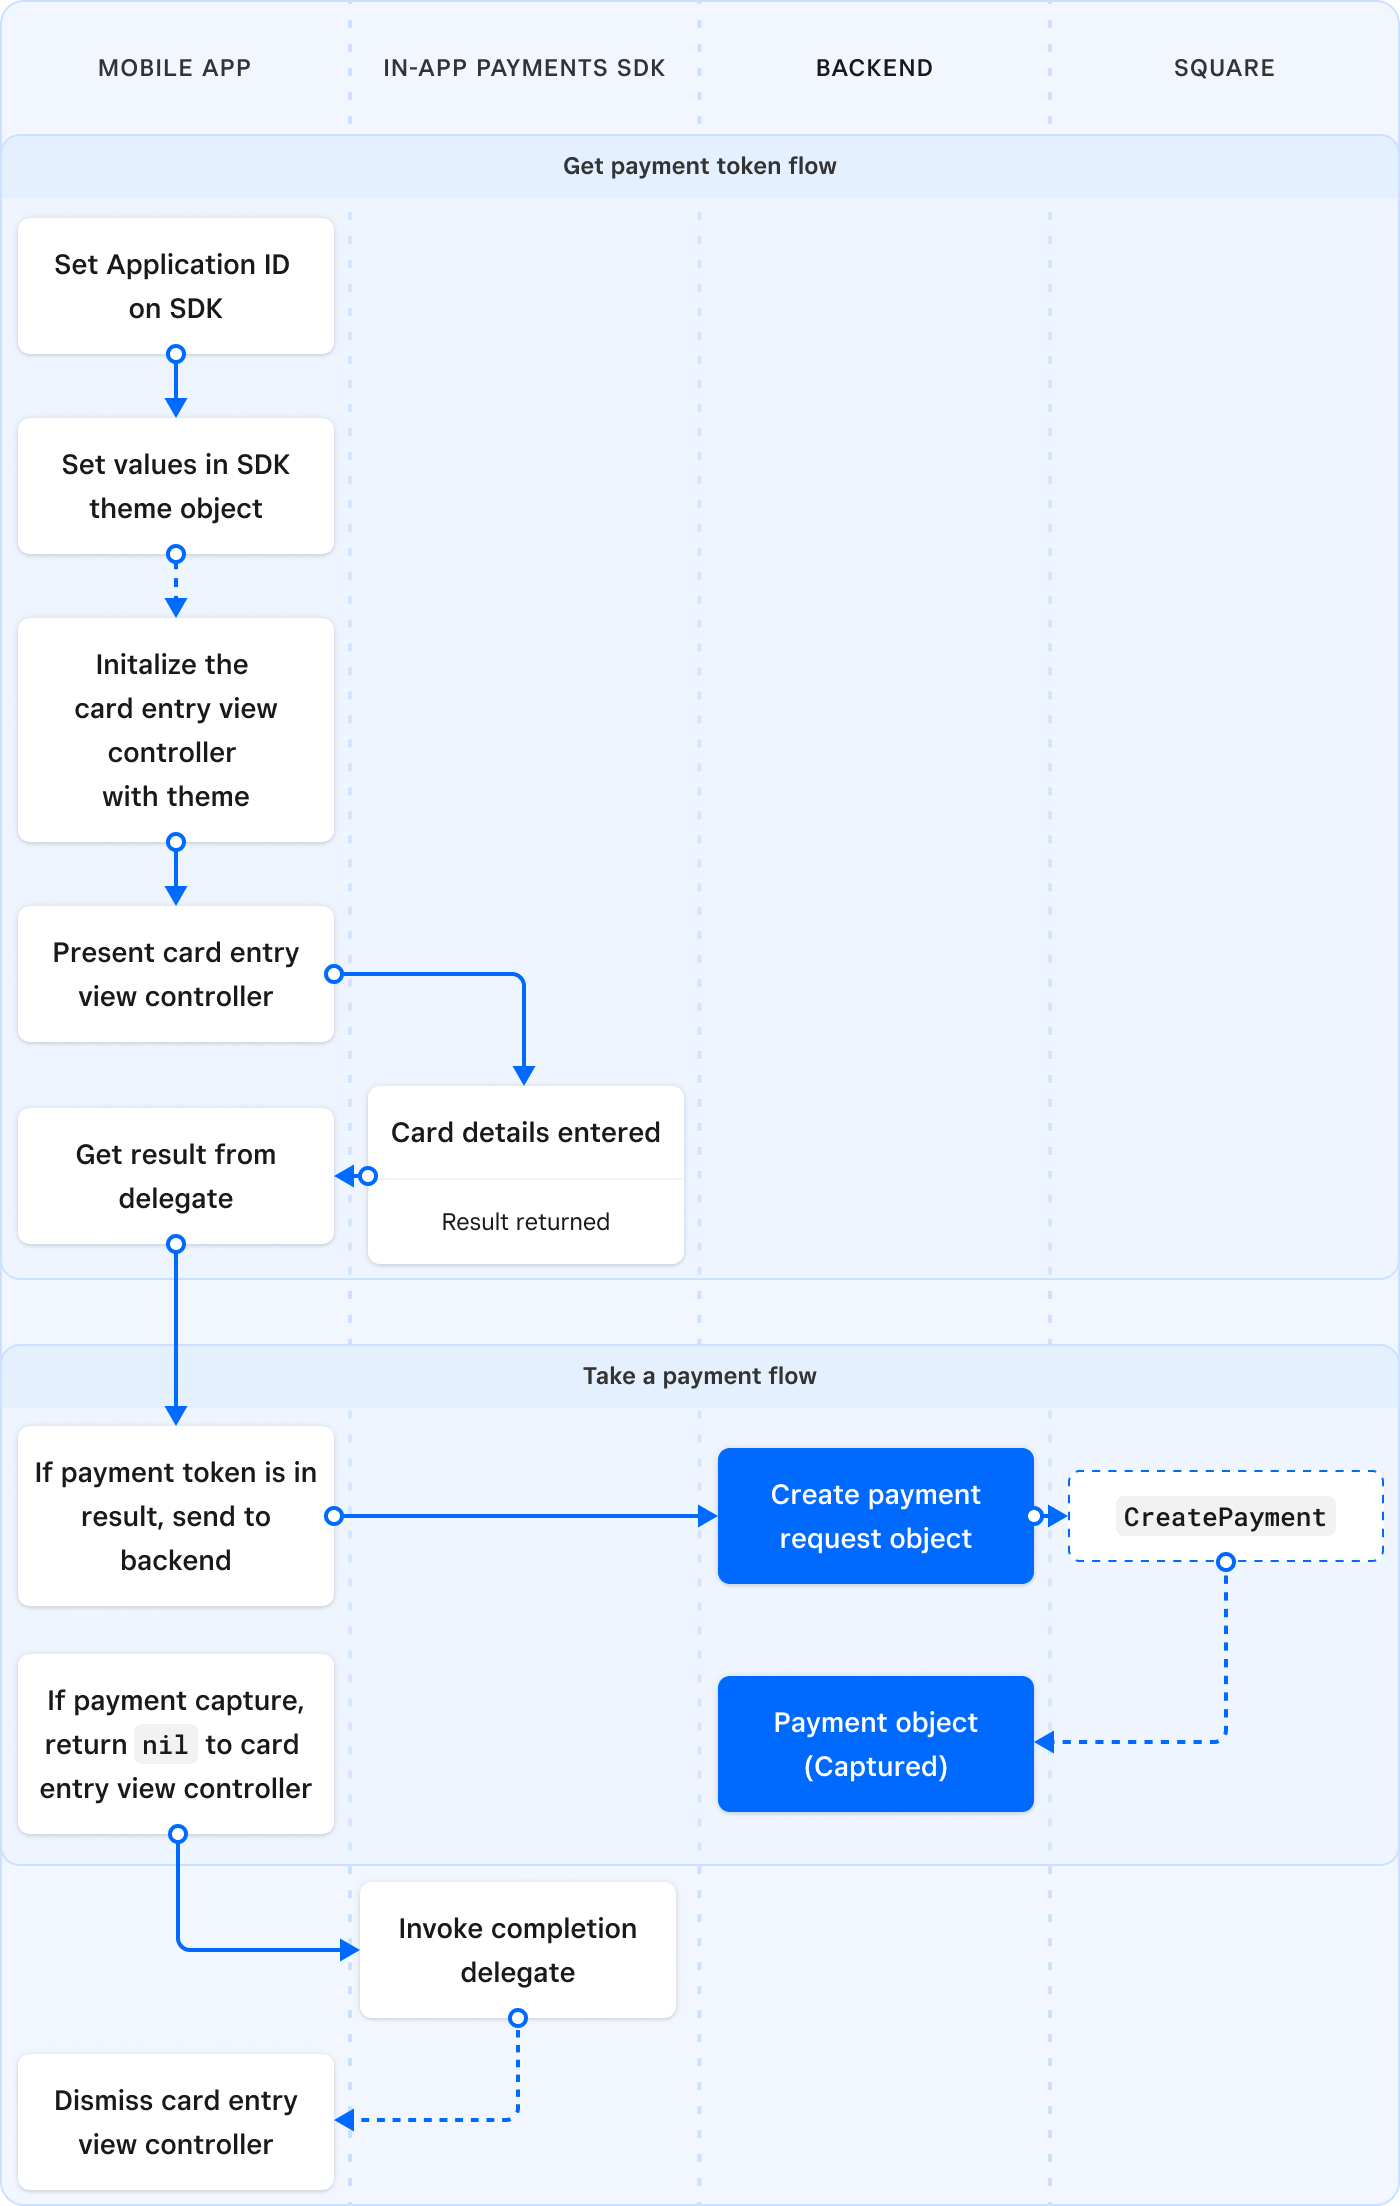 A diagram showing the mobile client to Square server process flow in the In-App Payments SDK with the payment token returned to a foreground callback method.